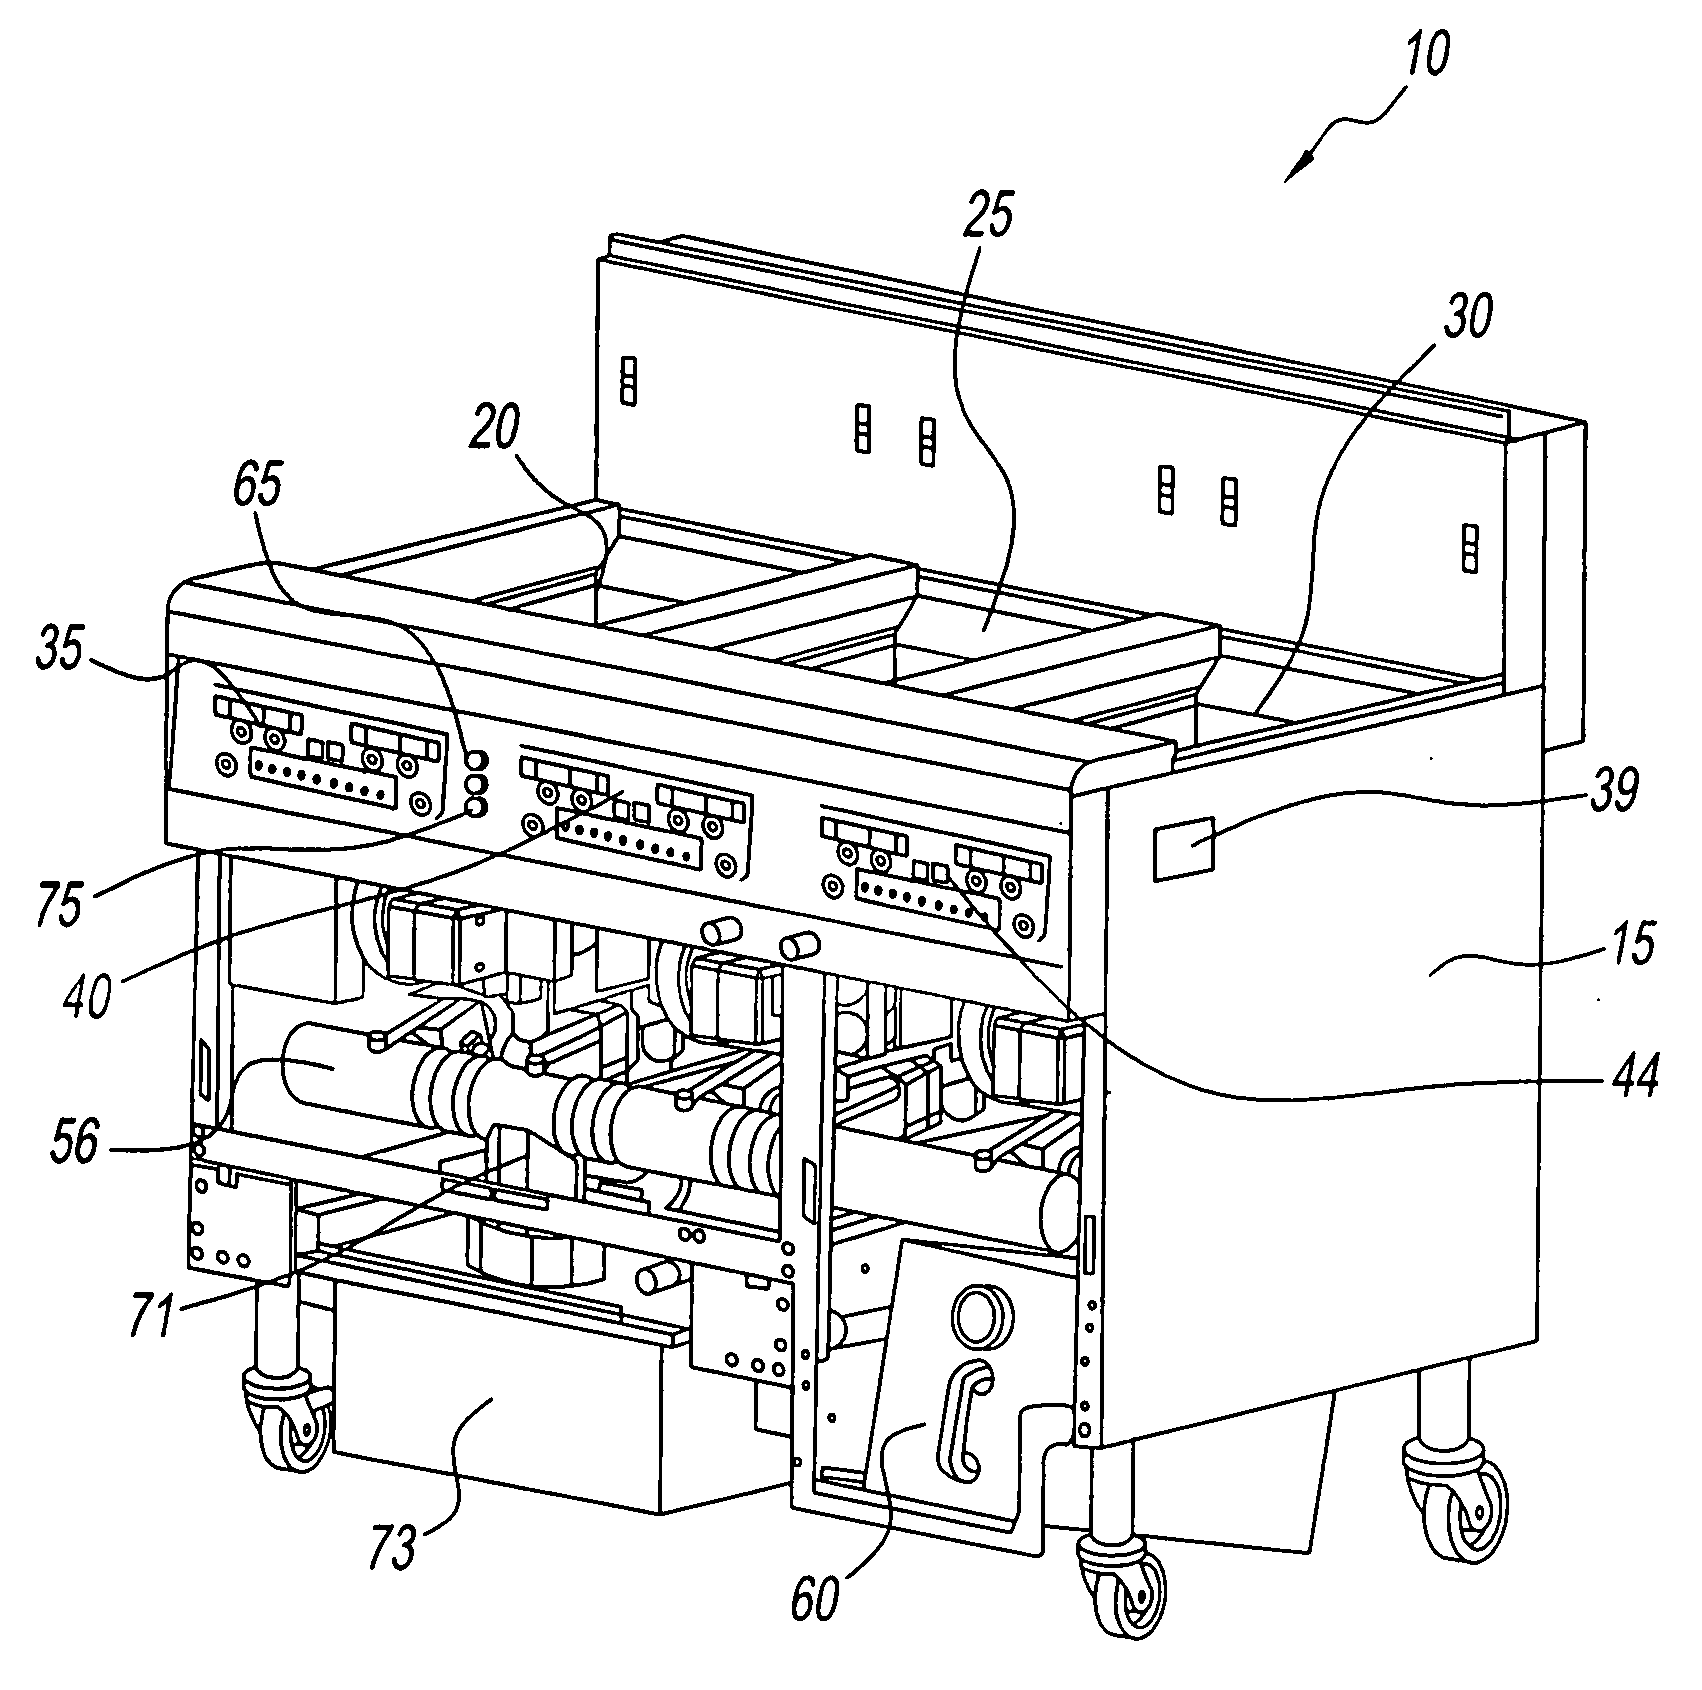 Low oil volume fryer with automatic filtration and top-off capability